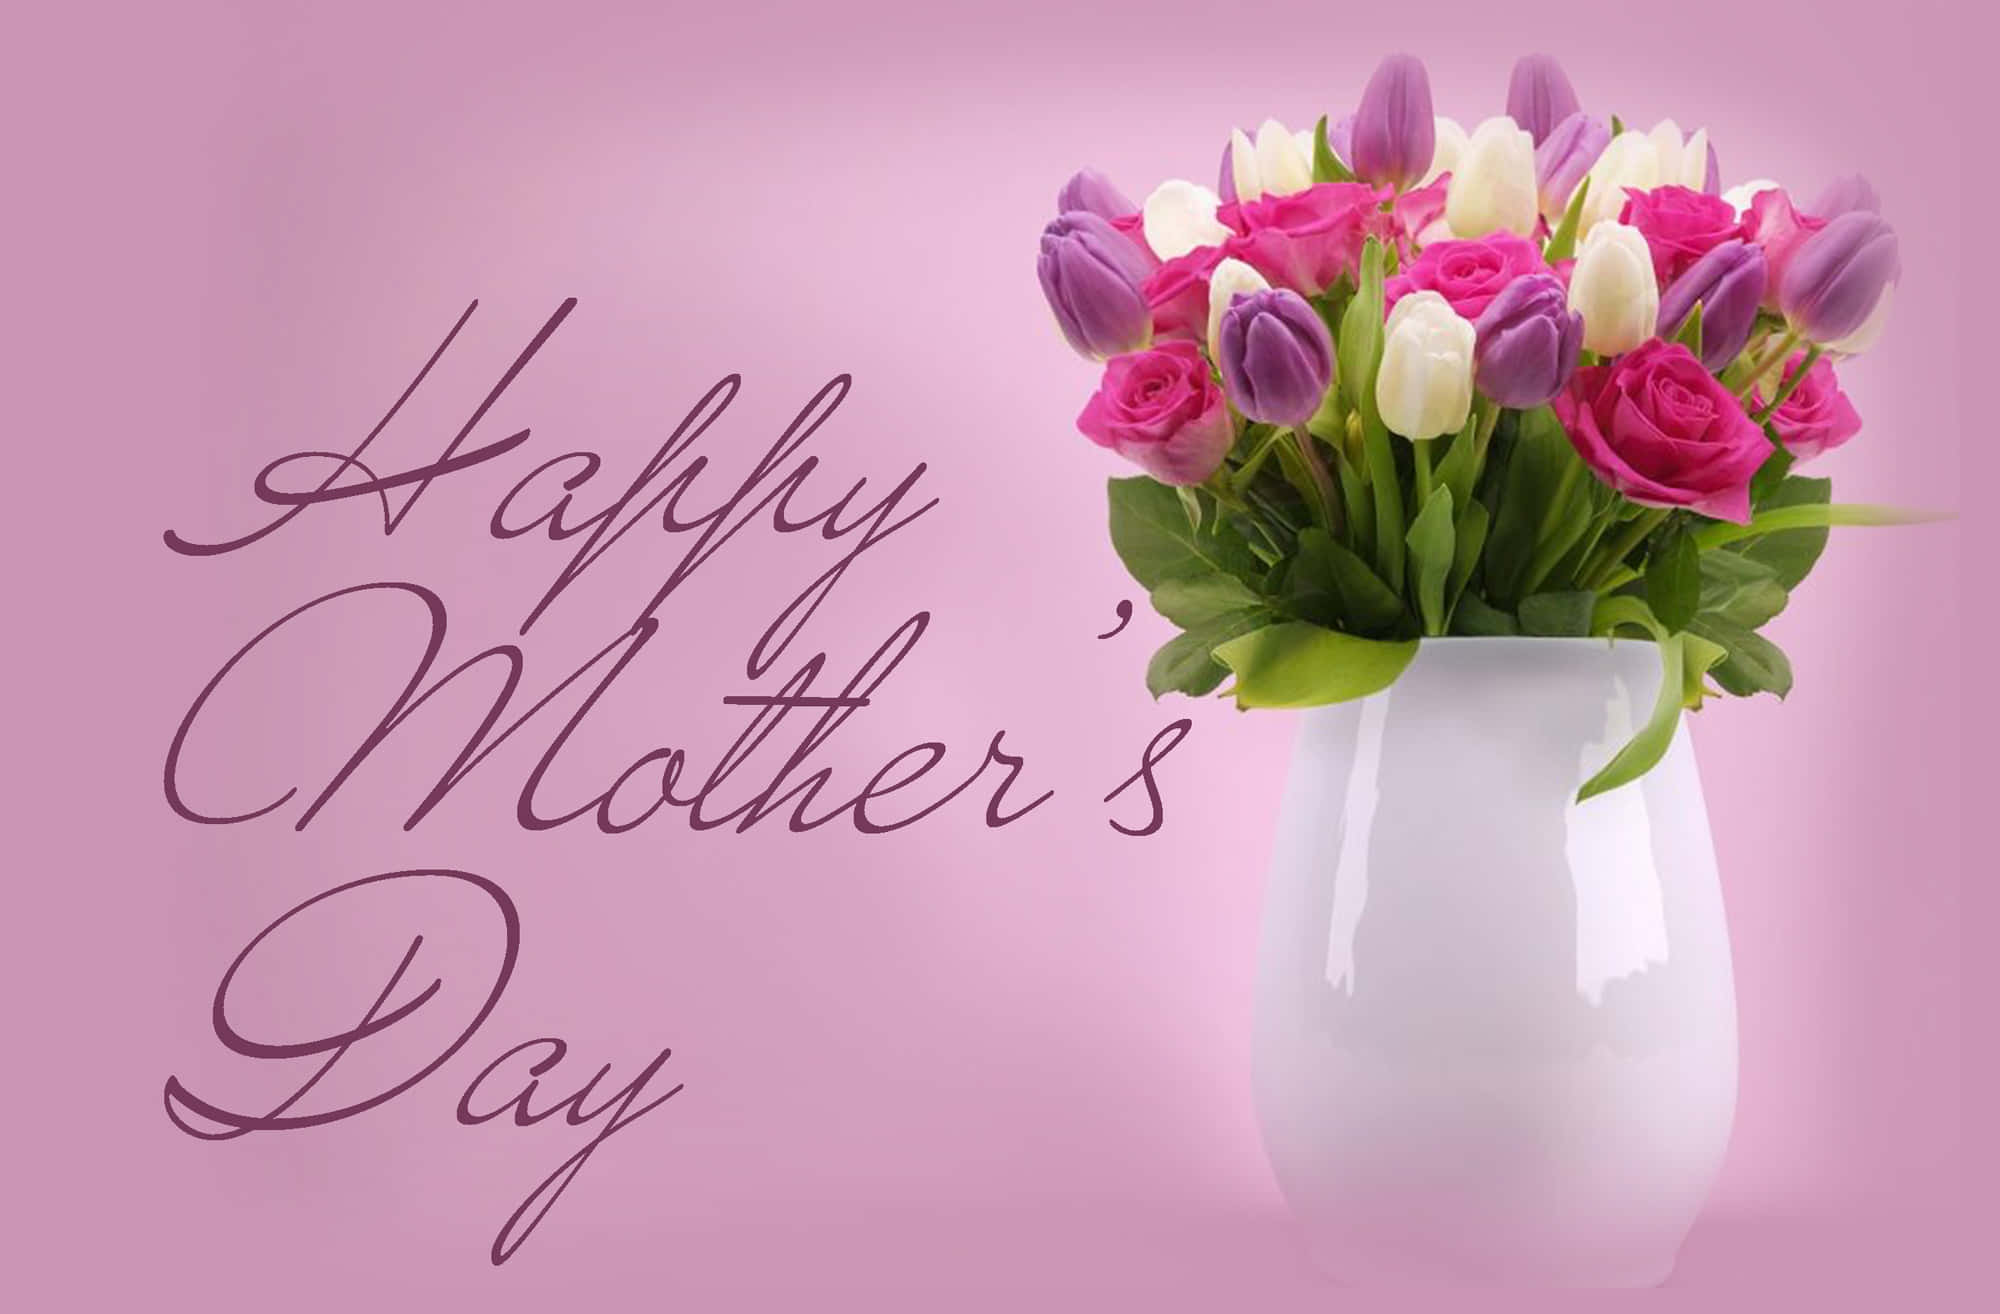 Celebrate mothers everywhere this Mother's Day!